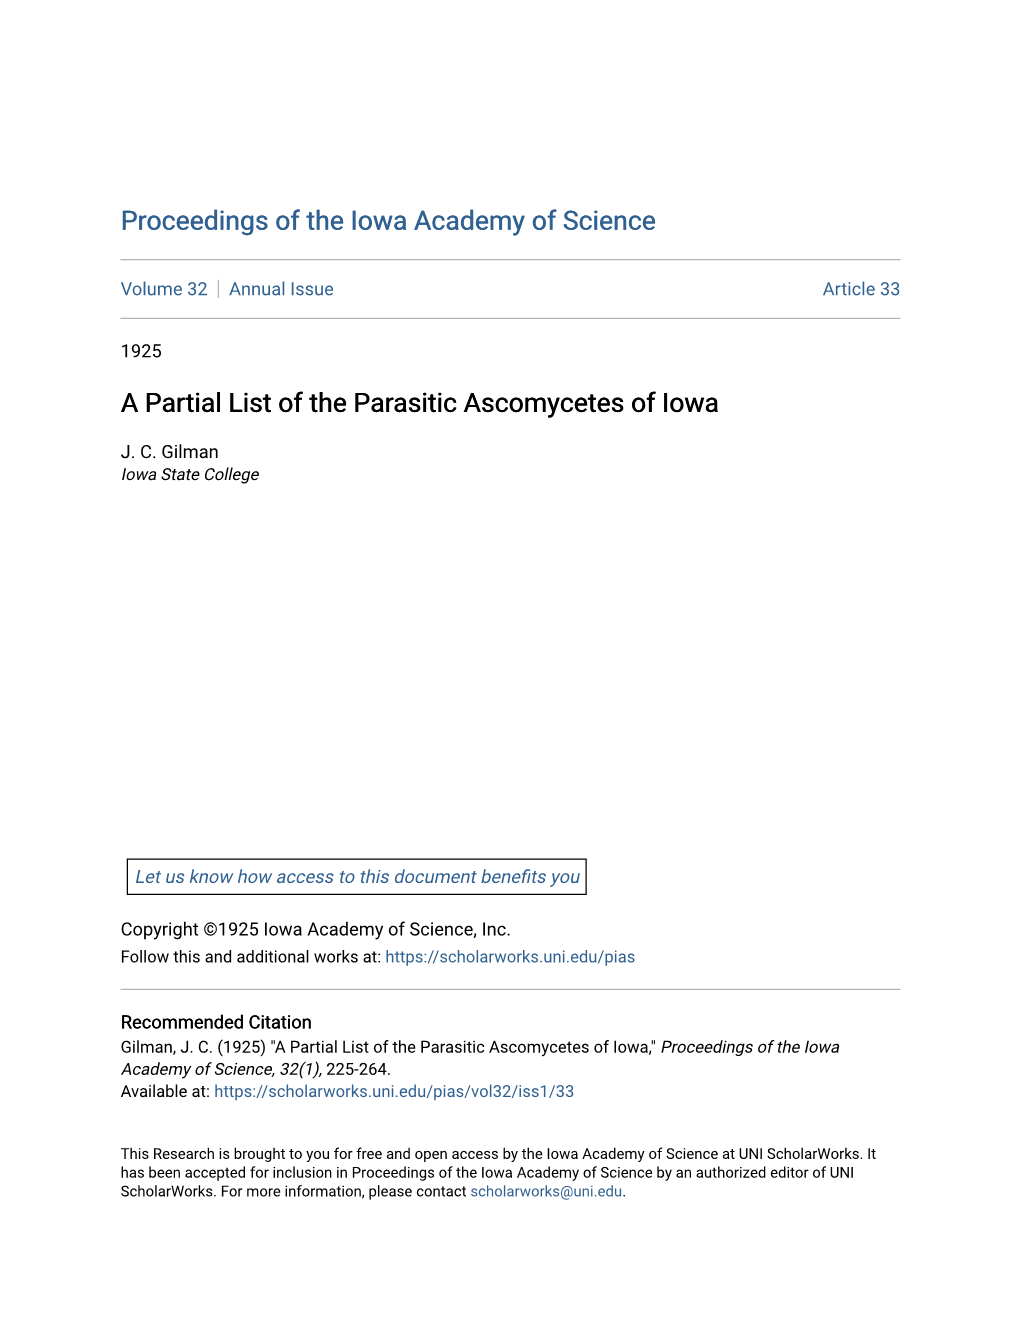 A Partial List of the Parasitic Ascomycetes of Iowa